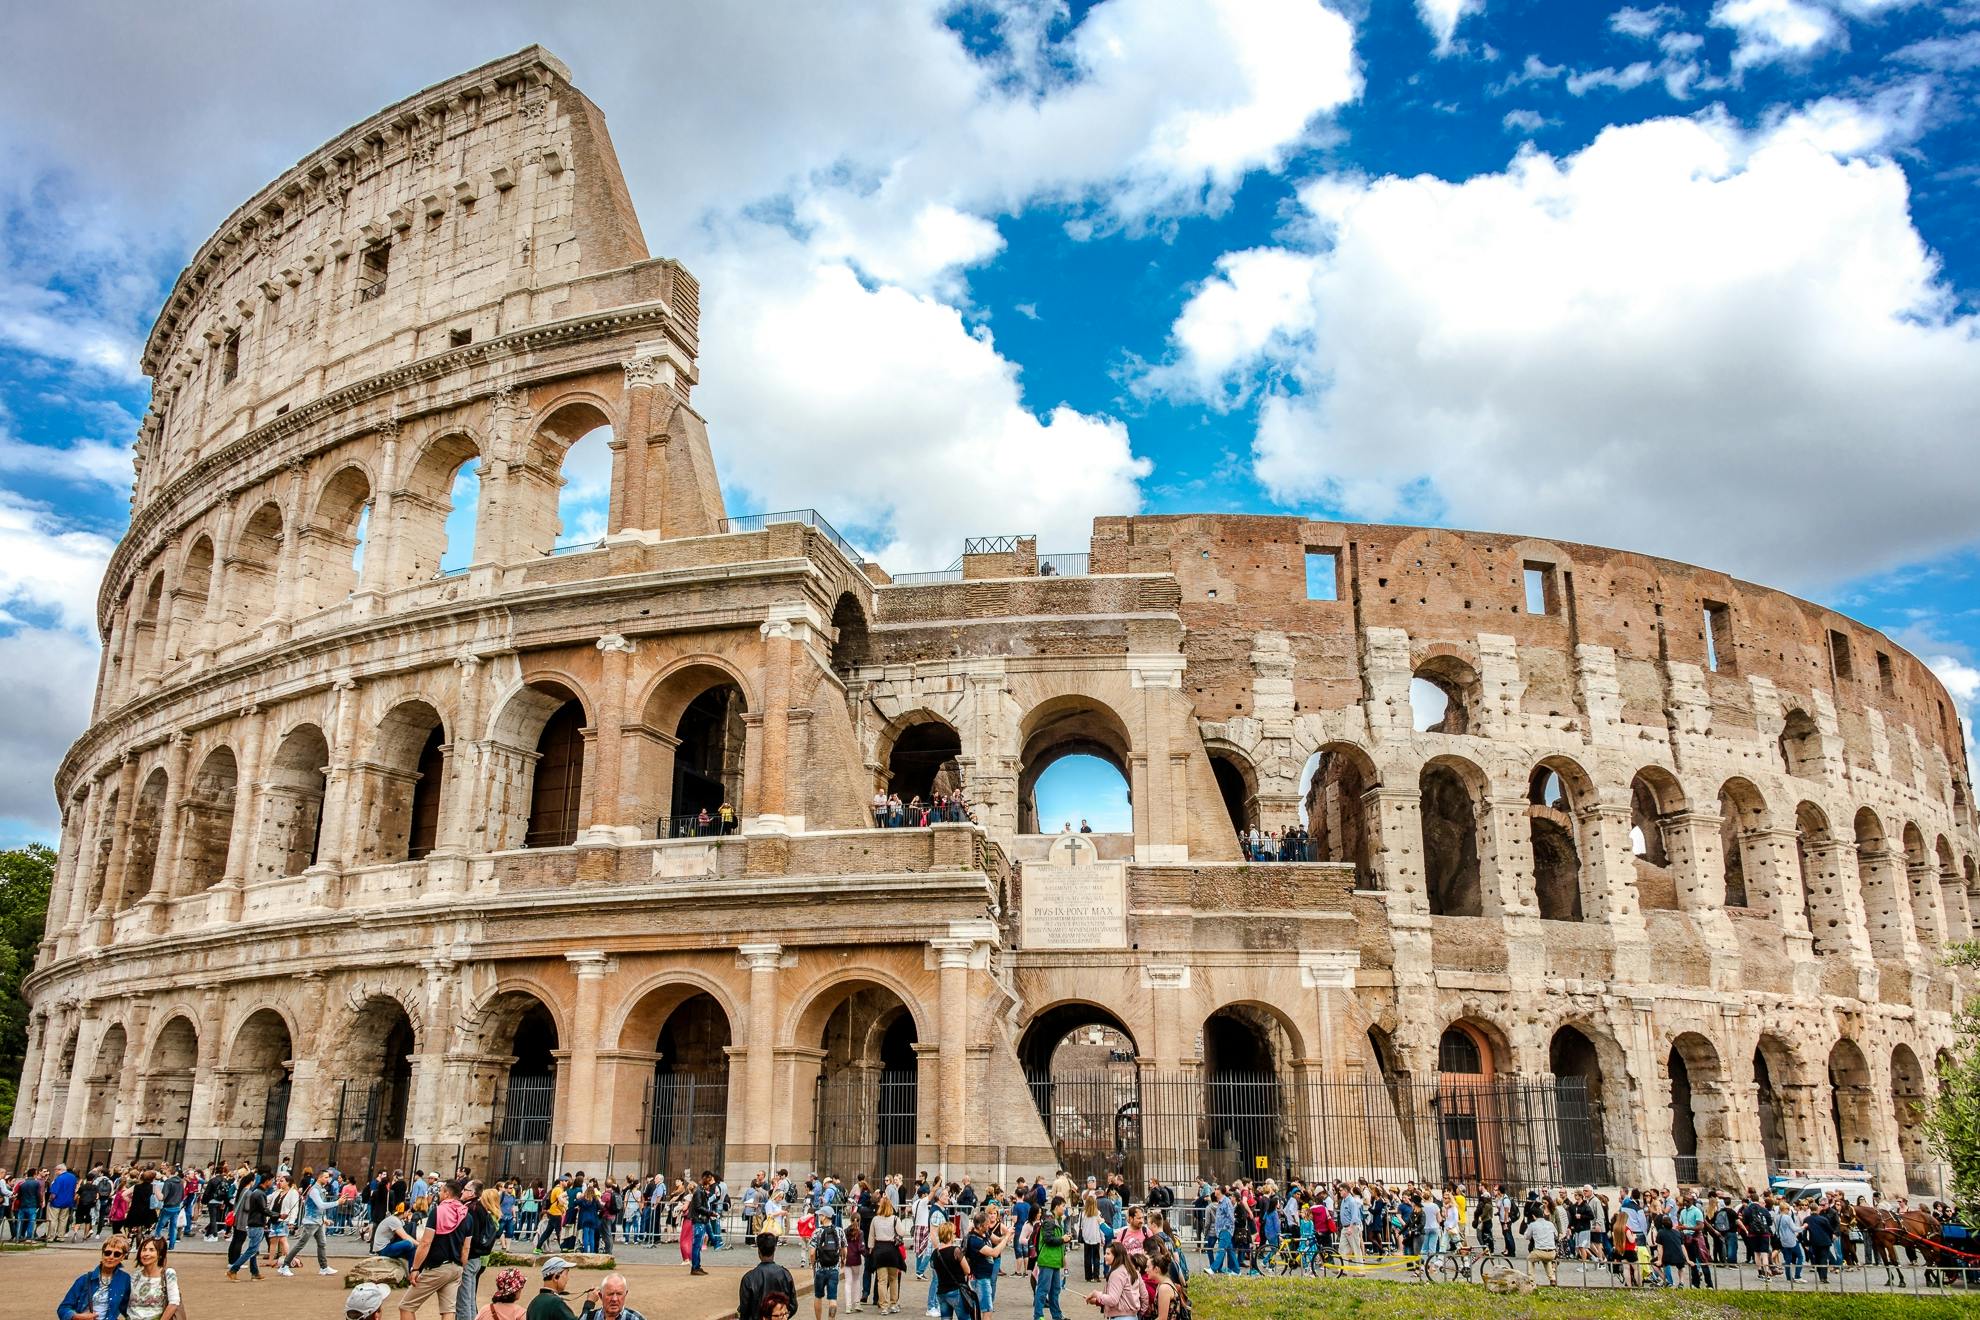 Colosseum & Roman Forum small-group tour with skip-the-line tickets & local guide